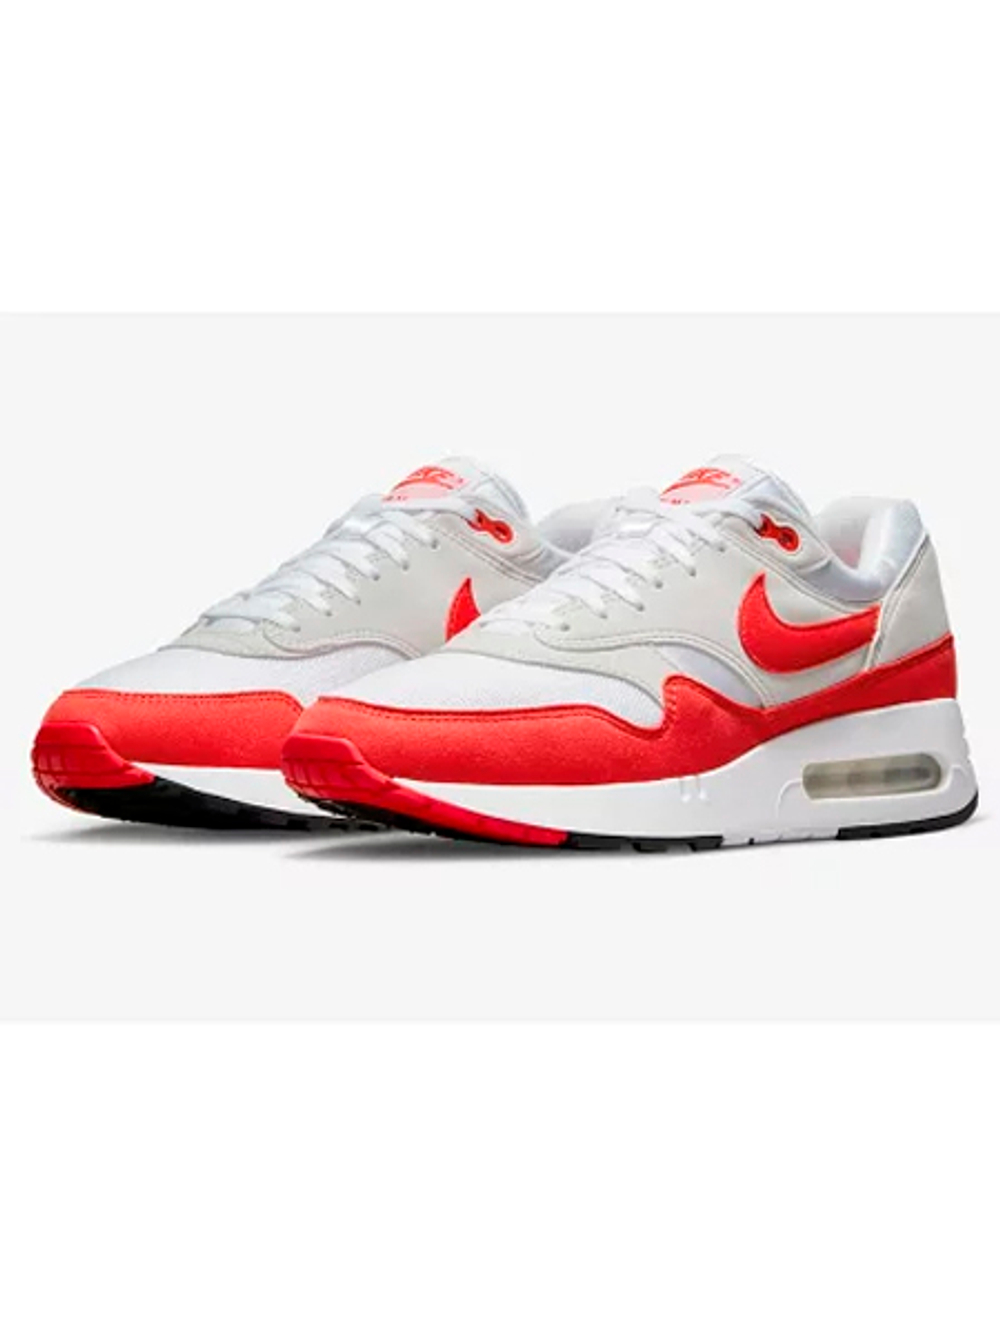 AIR MAX 1 '86 OG 'BIG BUBBLE - RED' DQ3989-100